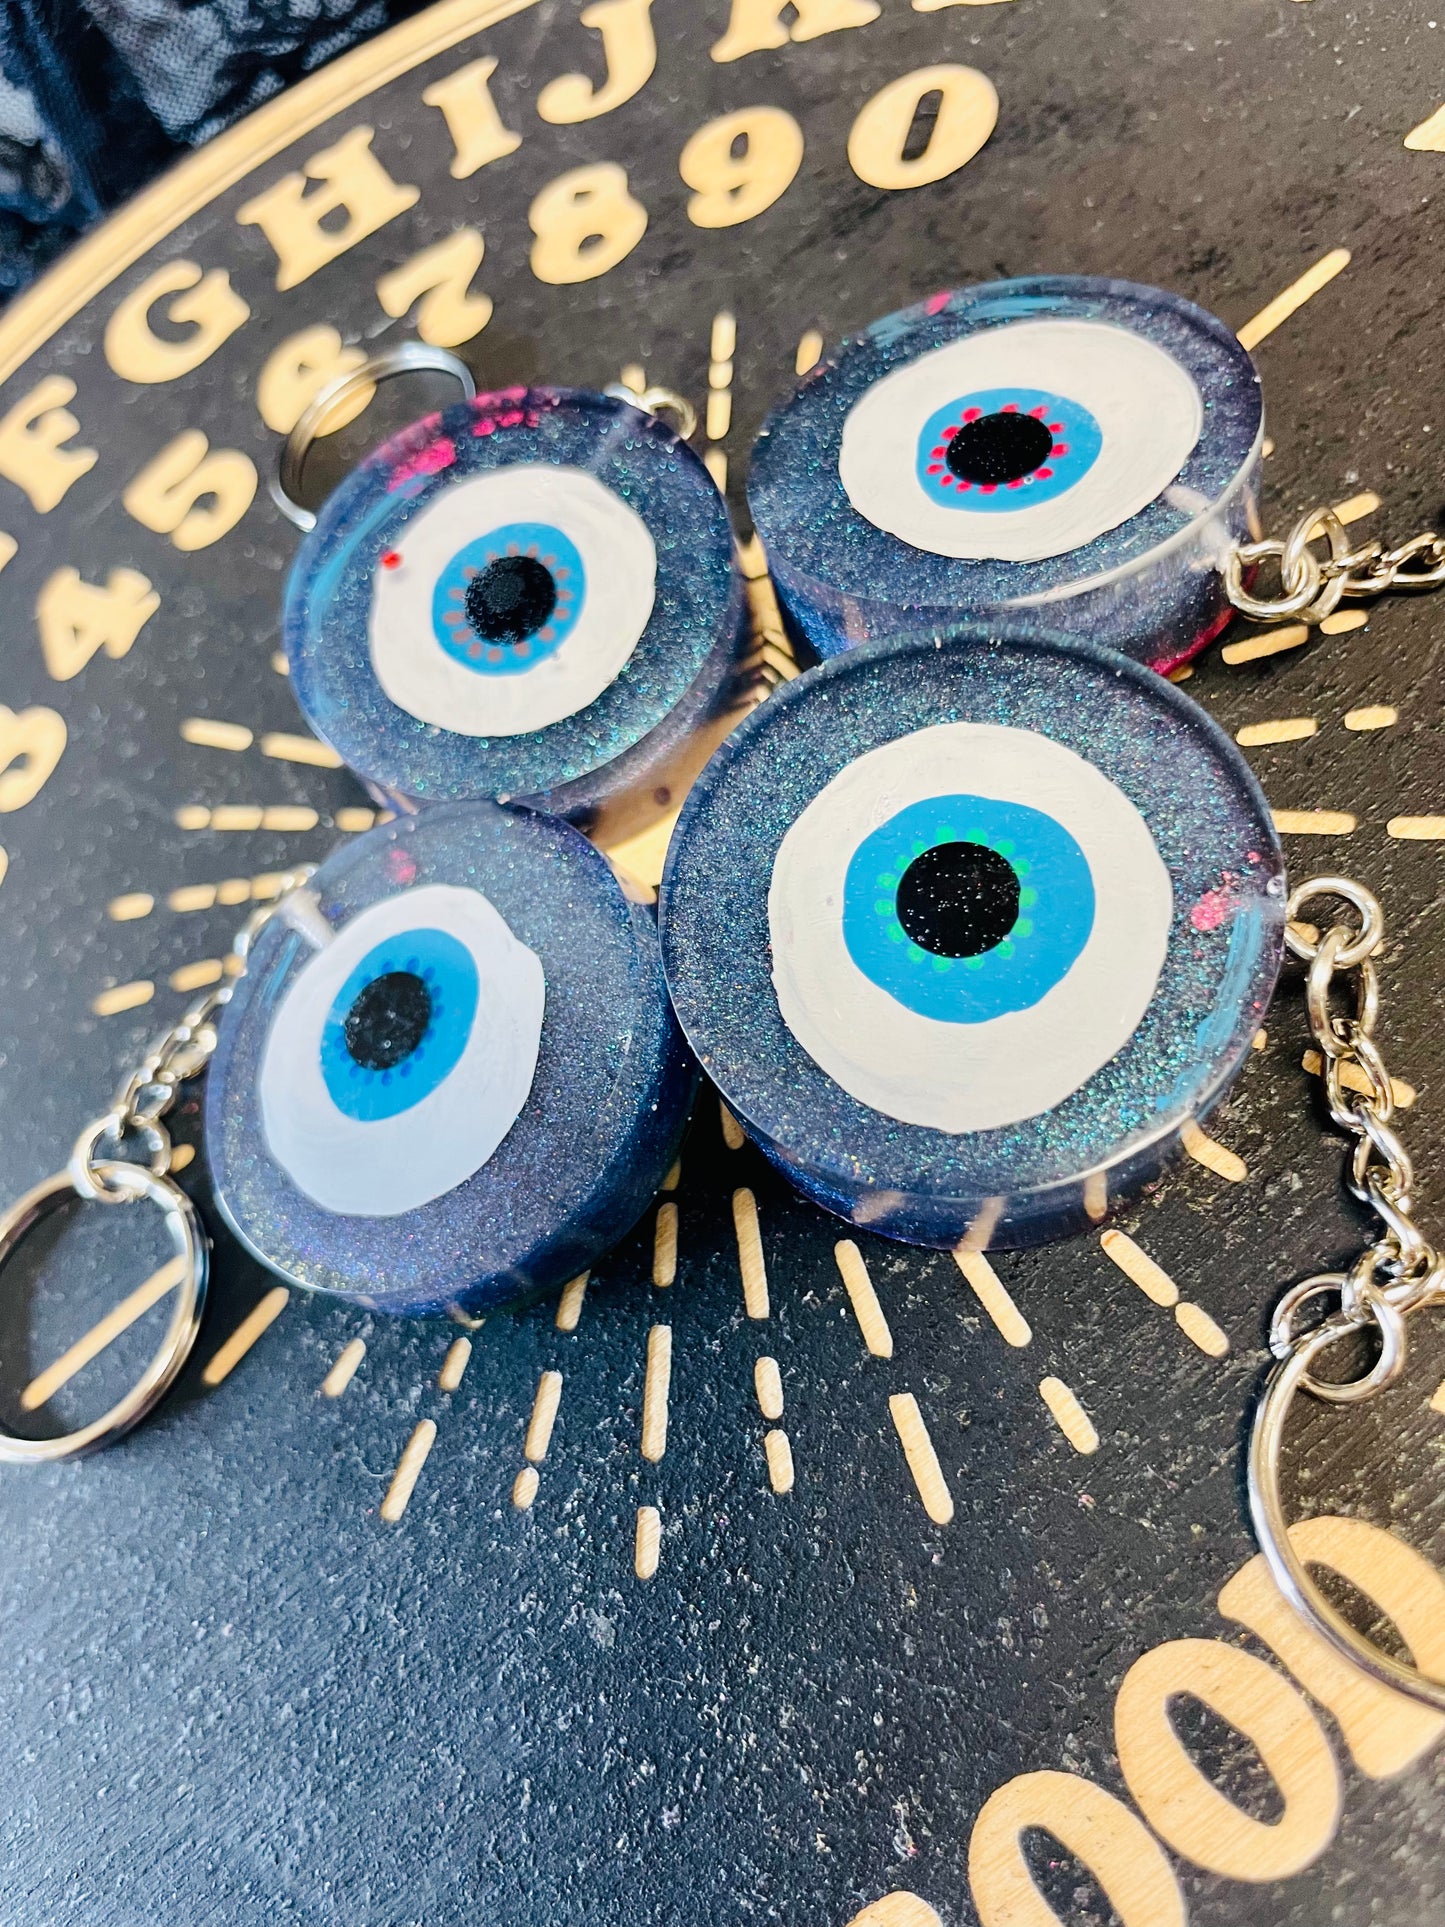 Evil Eye Protection Keychain, Bloodstone Crystal, Hand-painted